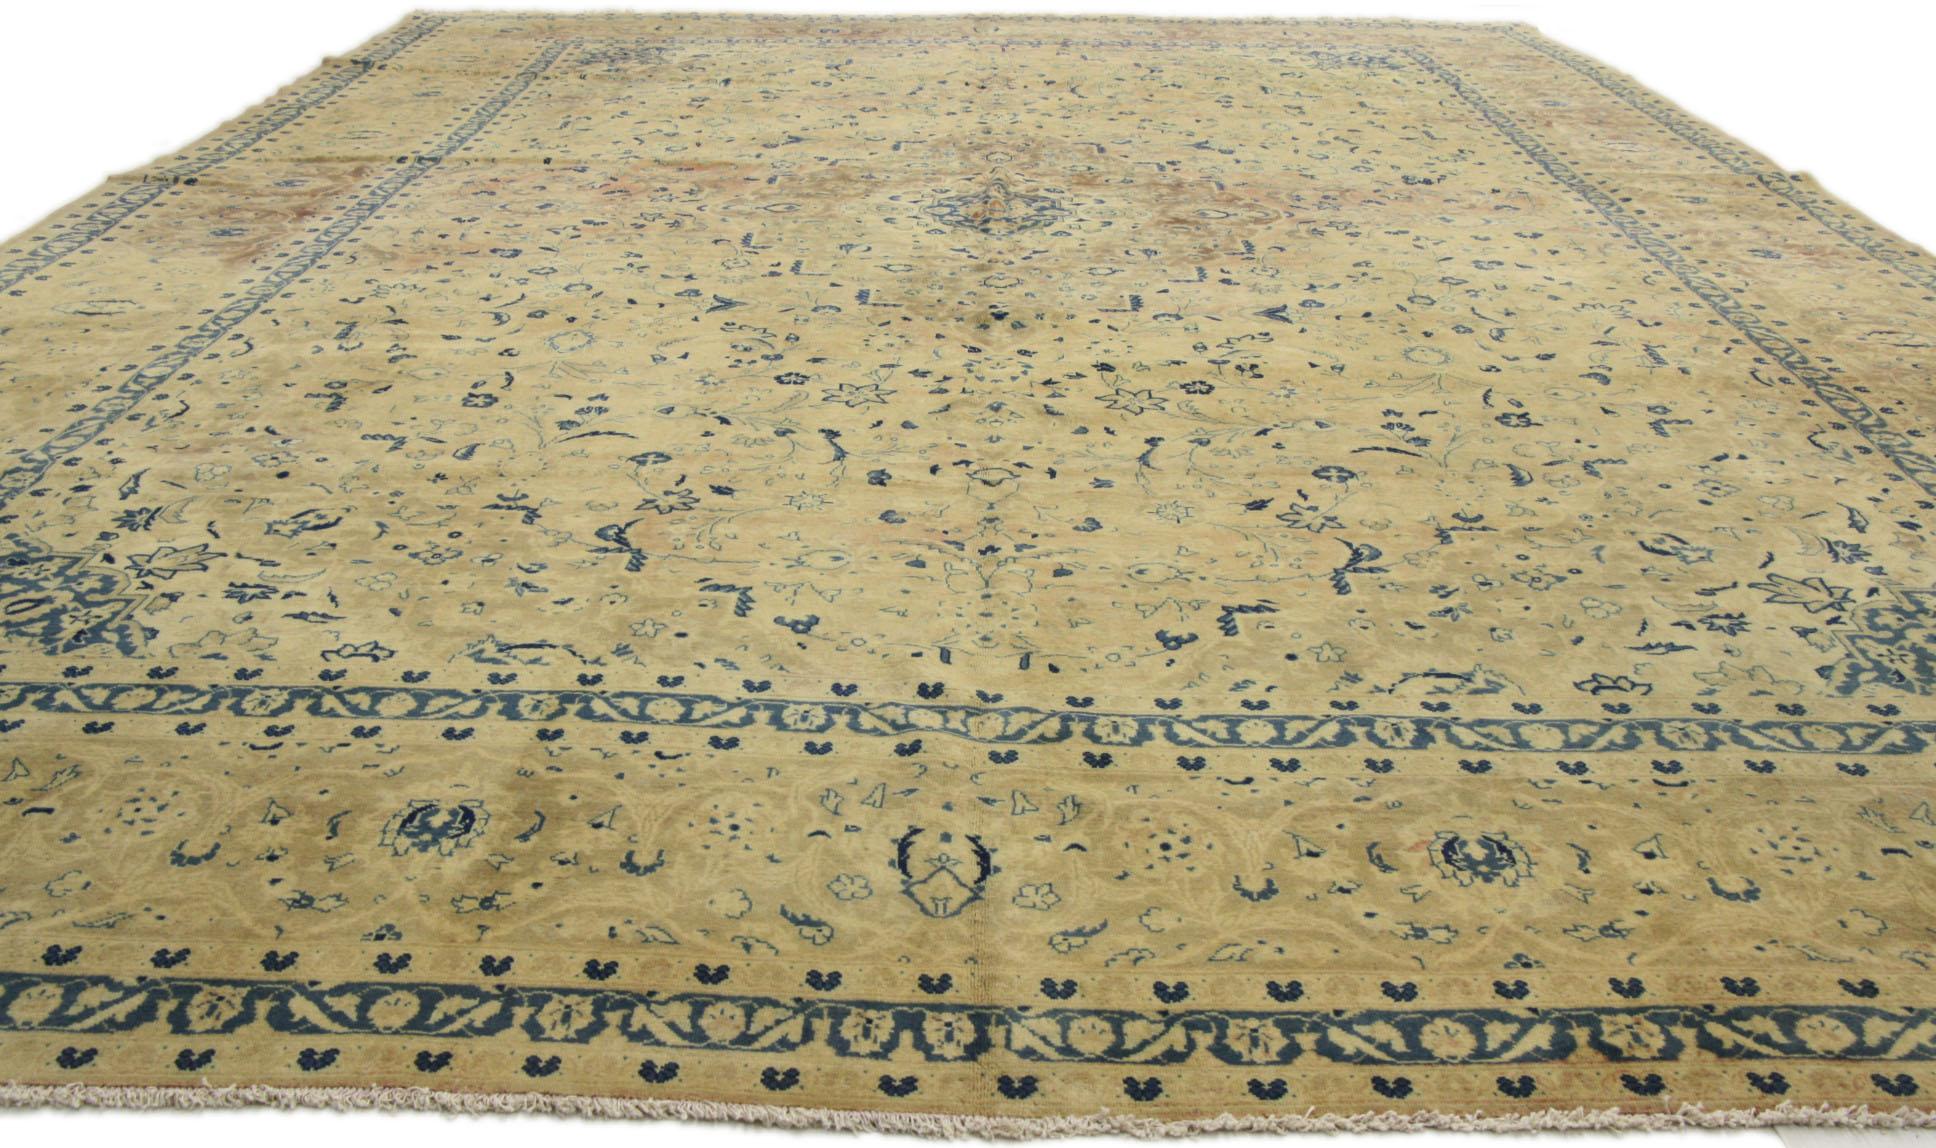 76514 Vintage Persian Kashan Palace Rug with French Country Style 11'02 x 16'07. Lustrous decadence and French Country style is on display in this hand-knotted wool, vintage Persian Kashan rug. Surrounding a dainty center medallion with an outer